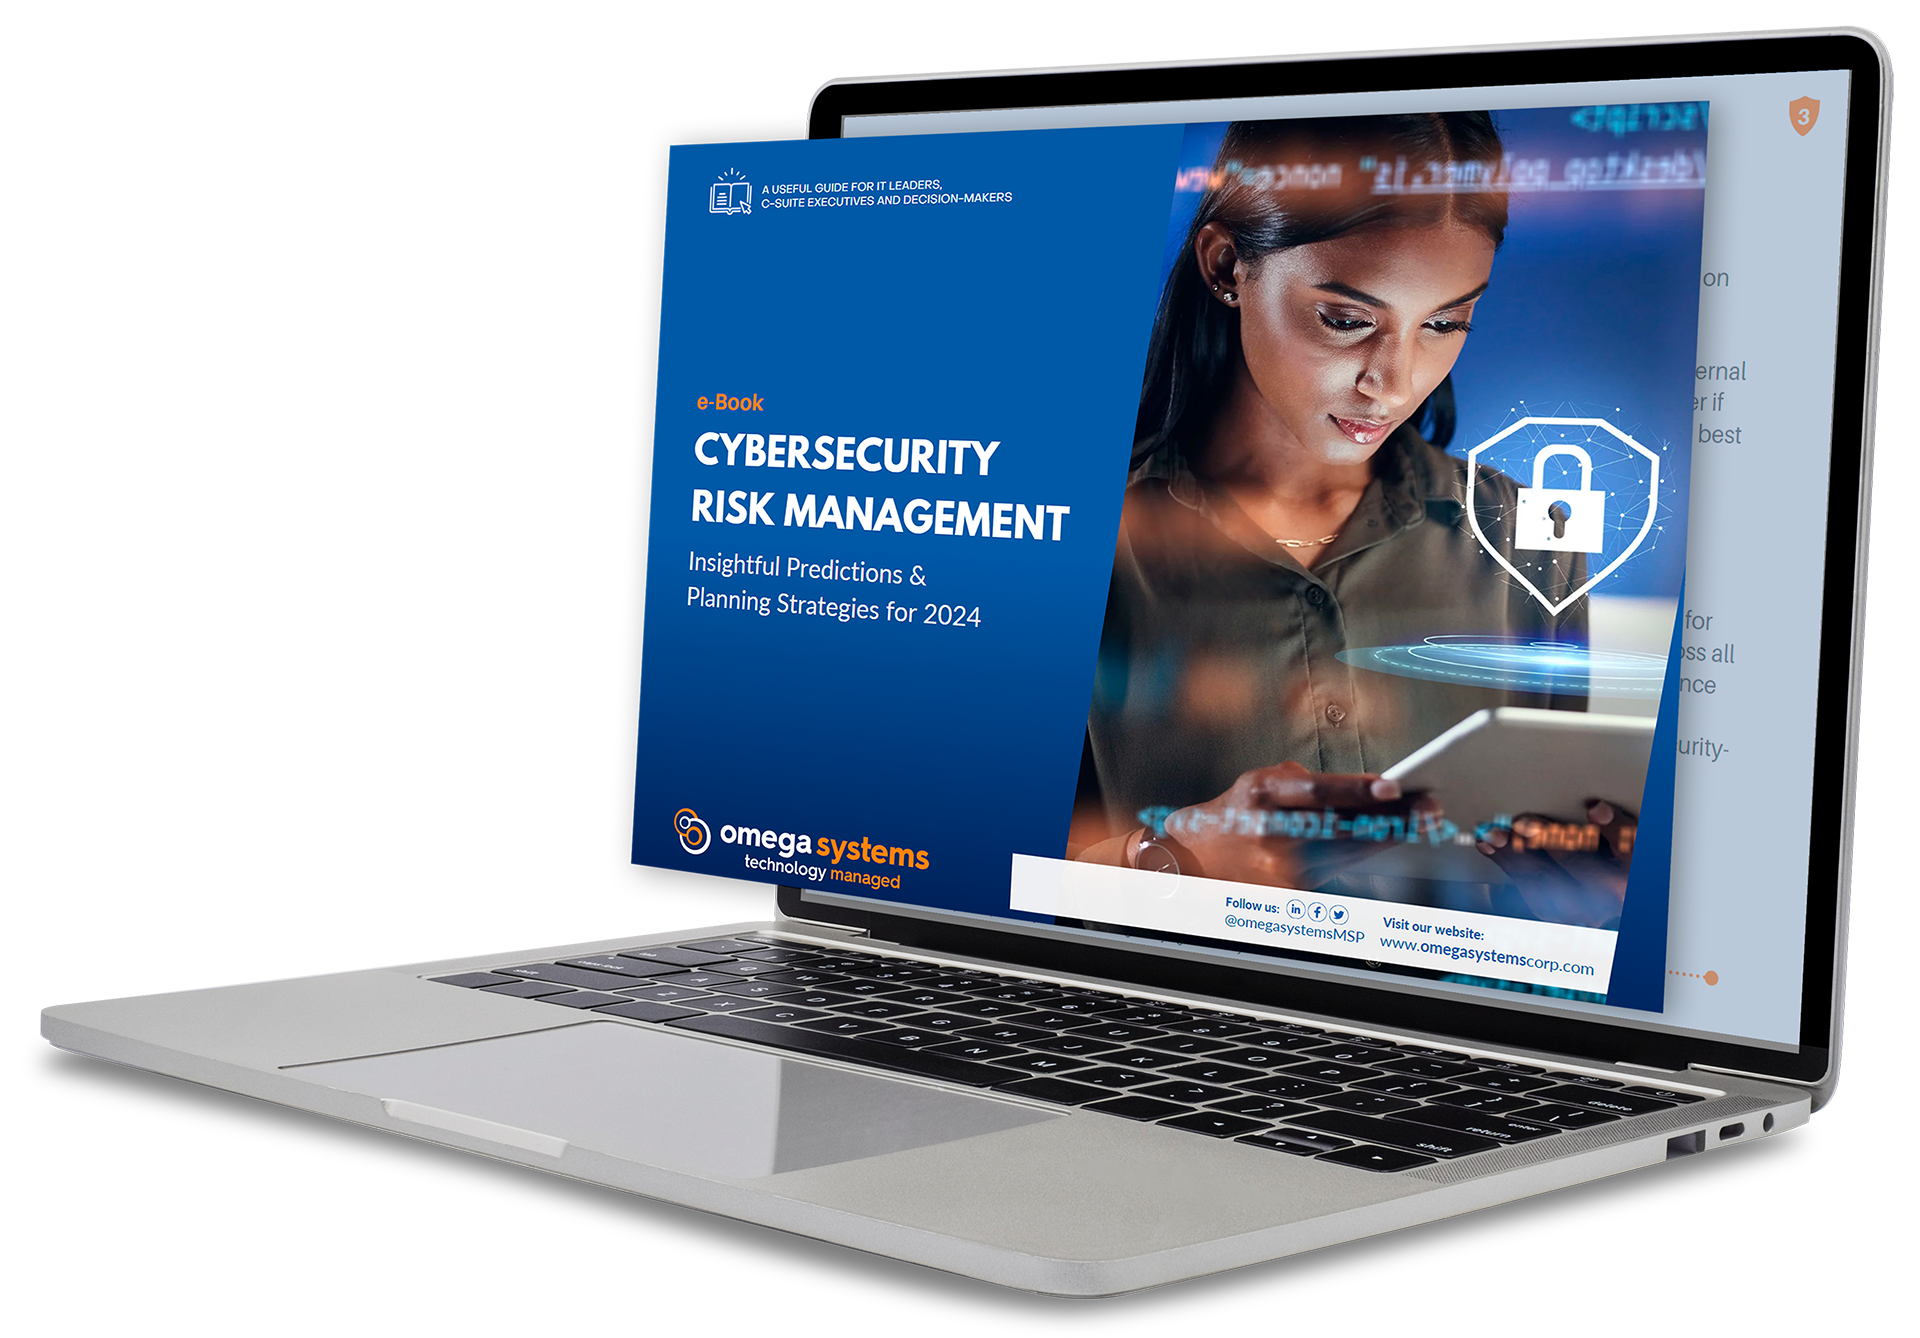 cybersecurity e-book on laptop